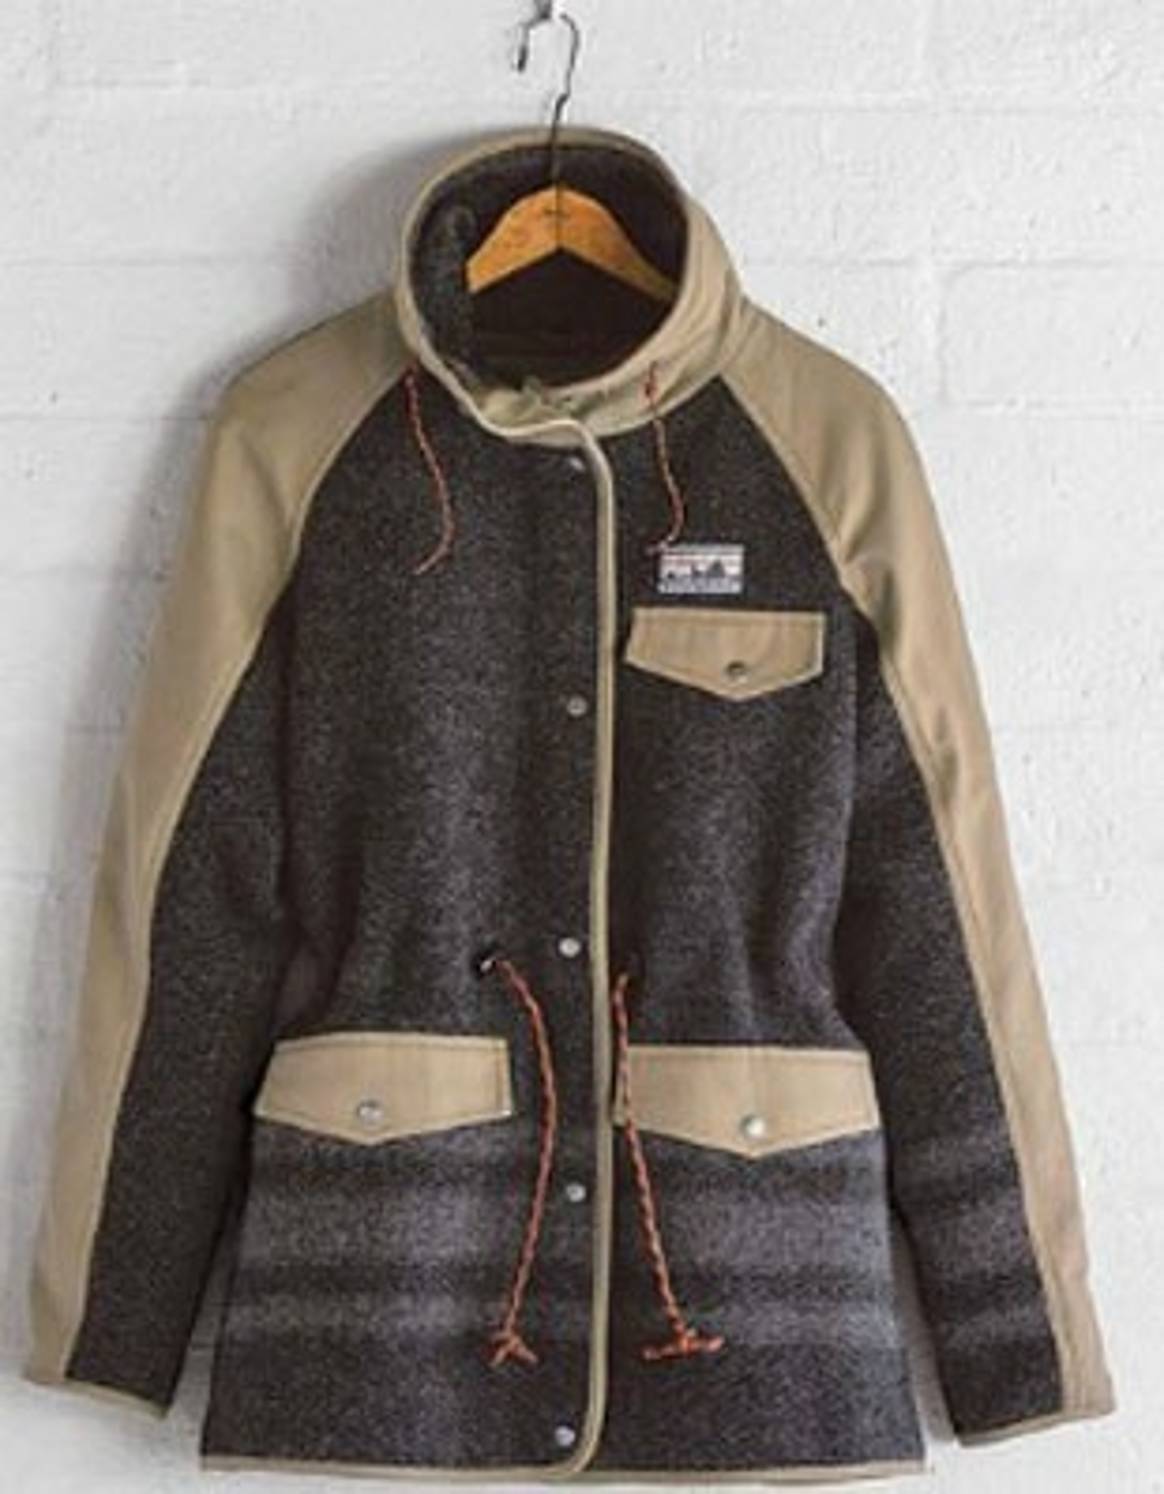 Patagonia's new line 'Truth to Materials' salvages cloth scrap